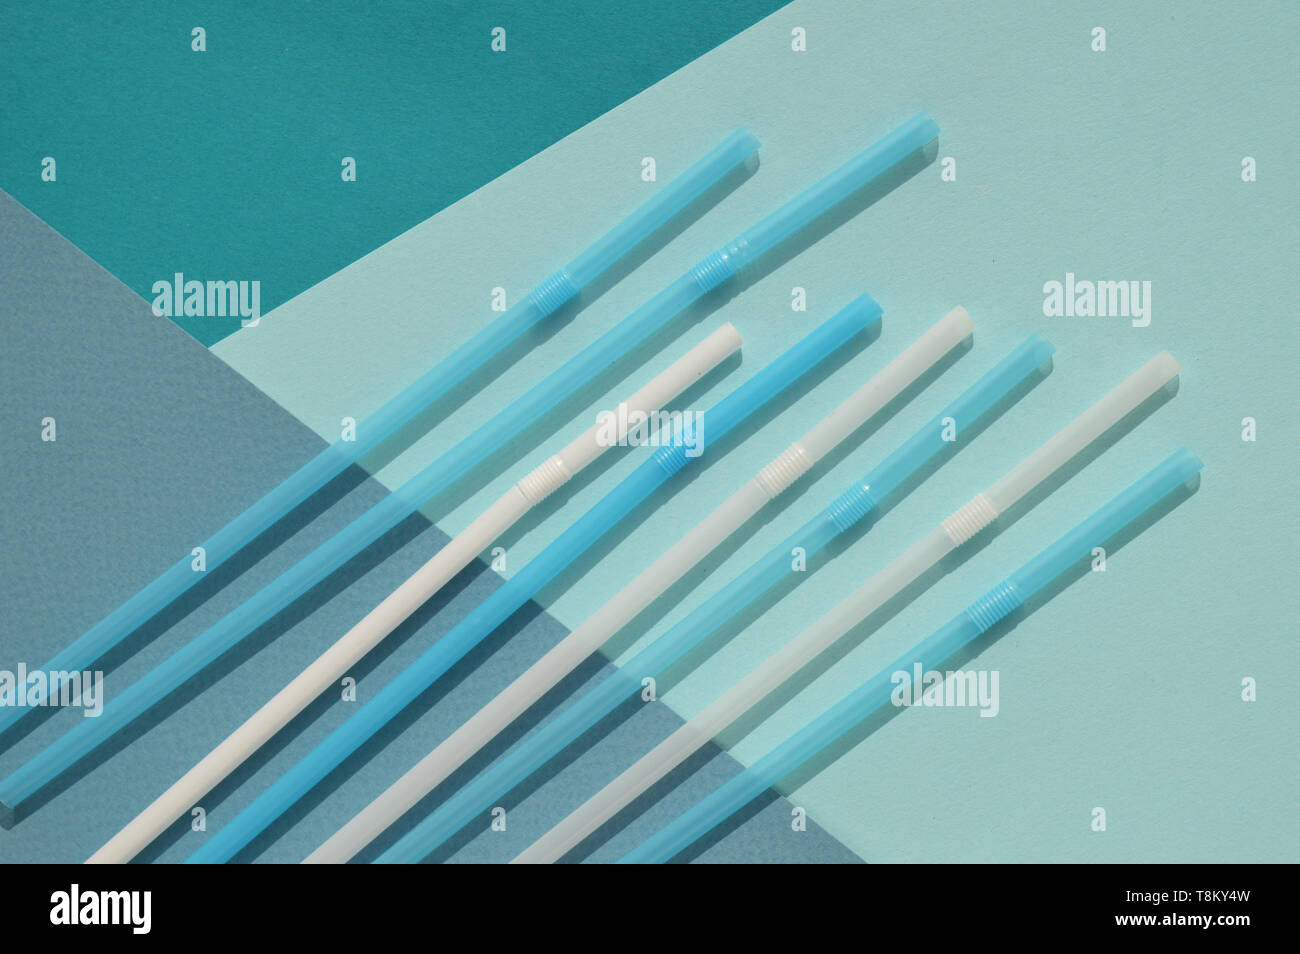 Turquoise and white plastic tubules on a mixed background of different tones of blue color. Plastic concept. Stock Photo